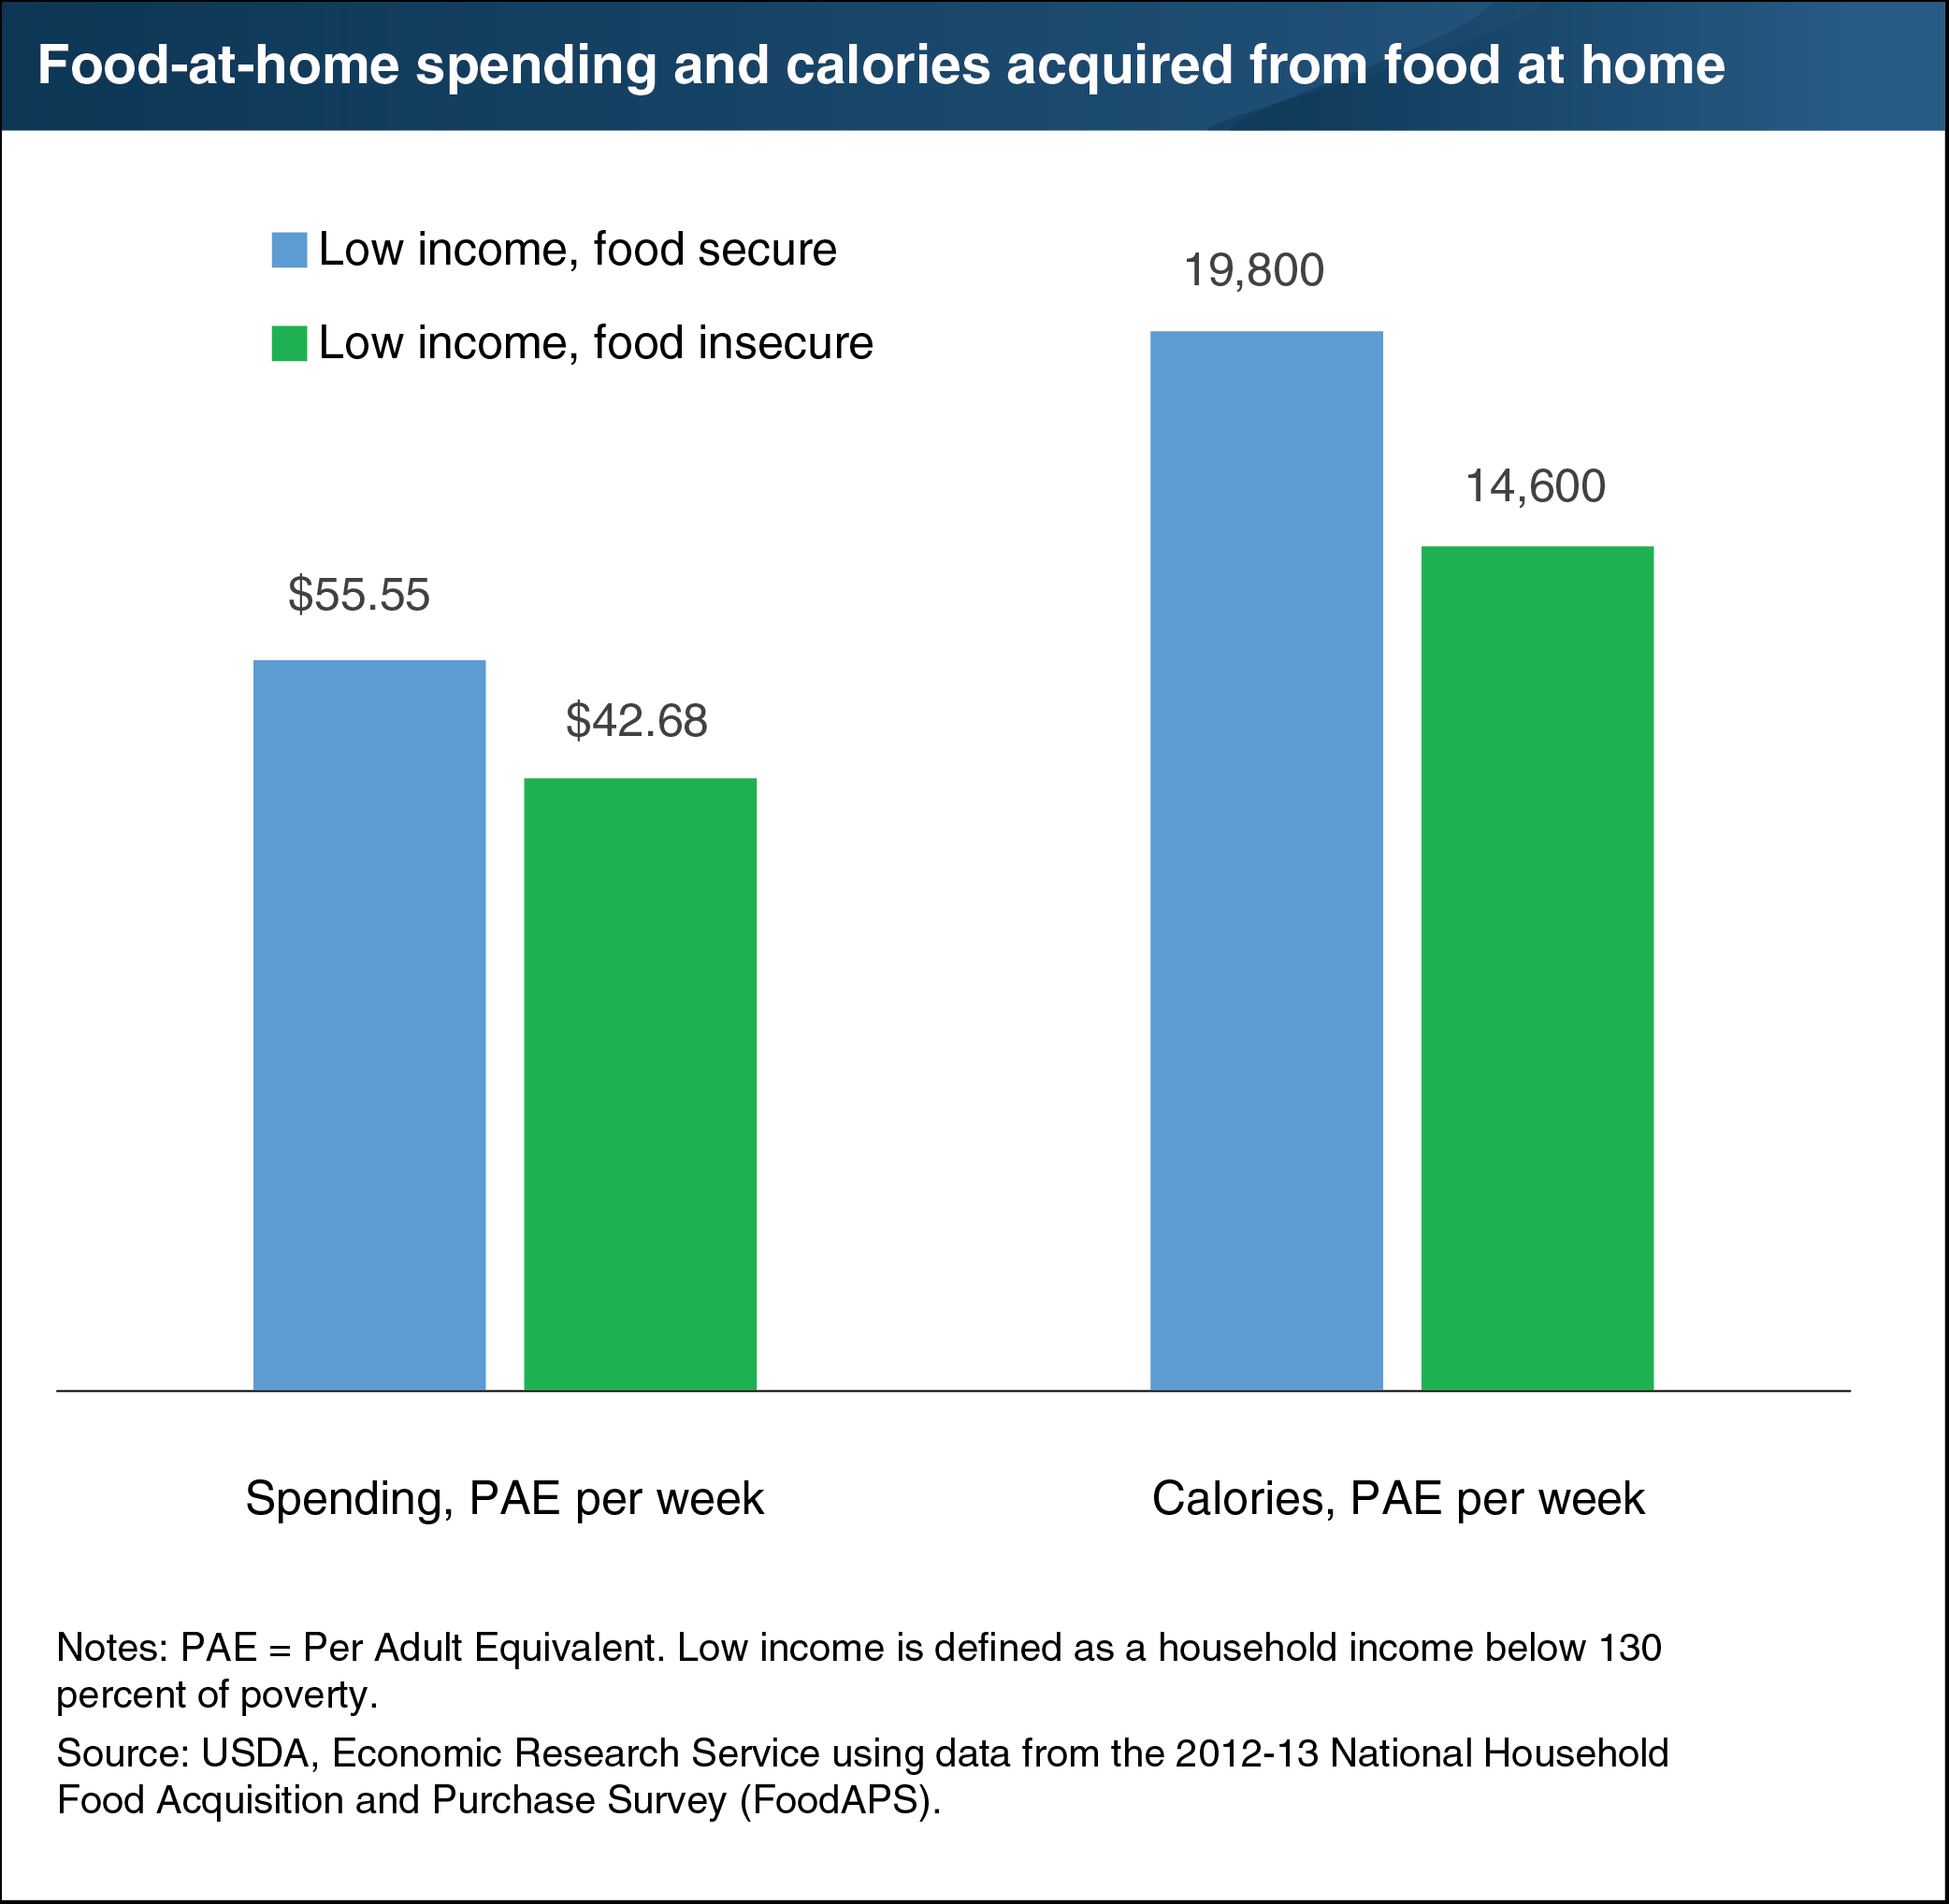 https://www.ers.usda.gov/webdocs/charts/95729/Food-at-home_spending_and_calories.png?v=8370.5